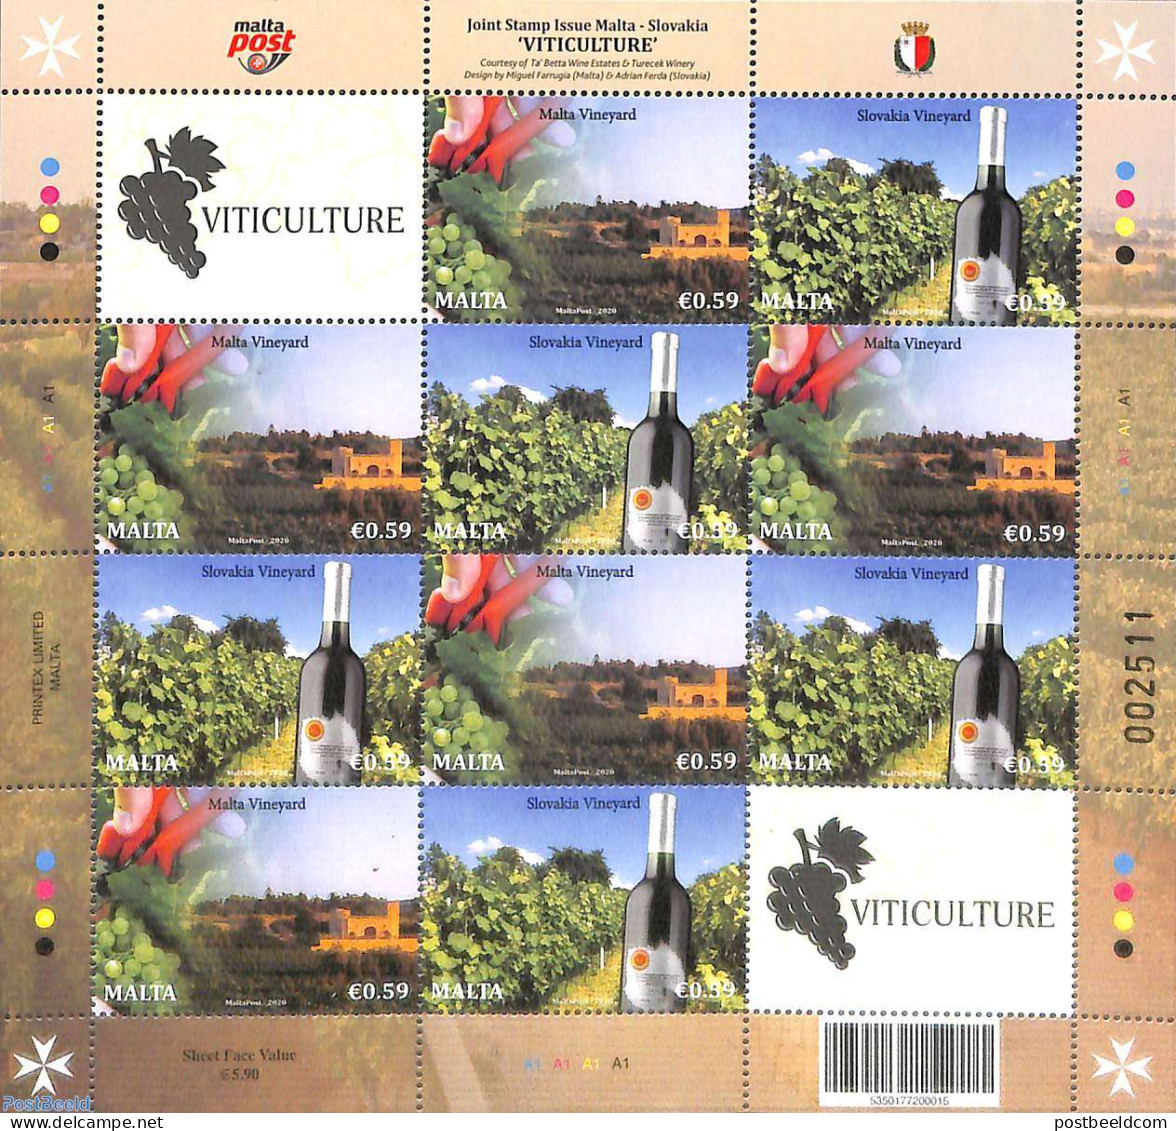 Malta 2020 Viniculture M/s, Joint Issue Slovenia, Mint NH, Nature - Wine & Winery - Wines & Alcohols